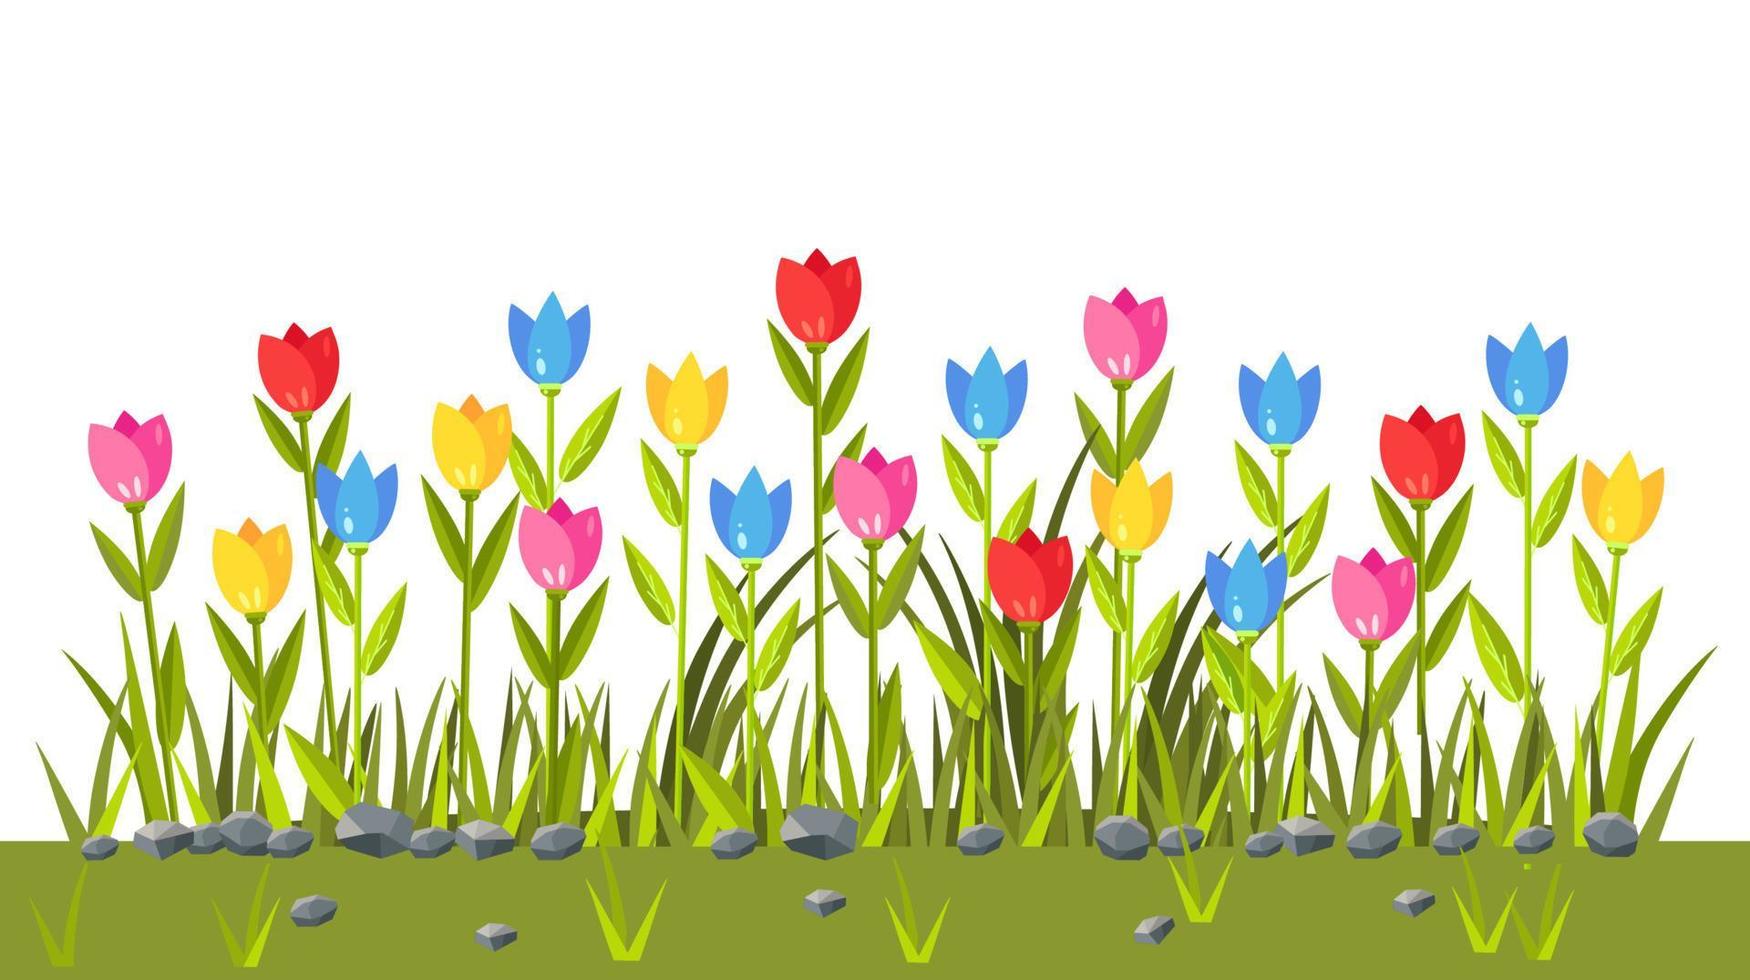 Flowers field with colorful tulips. Green grass border. Spring scene vector